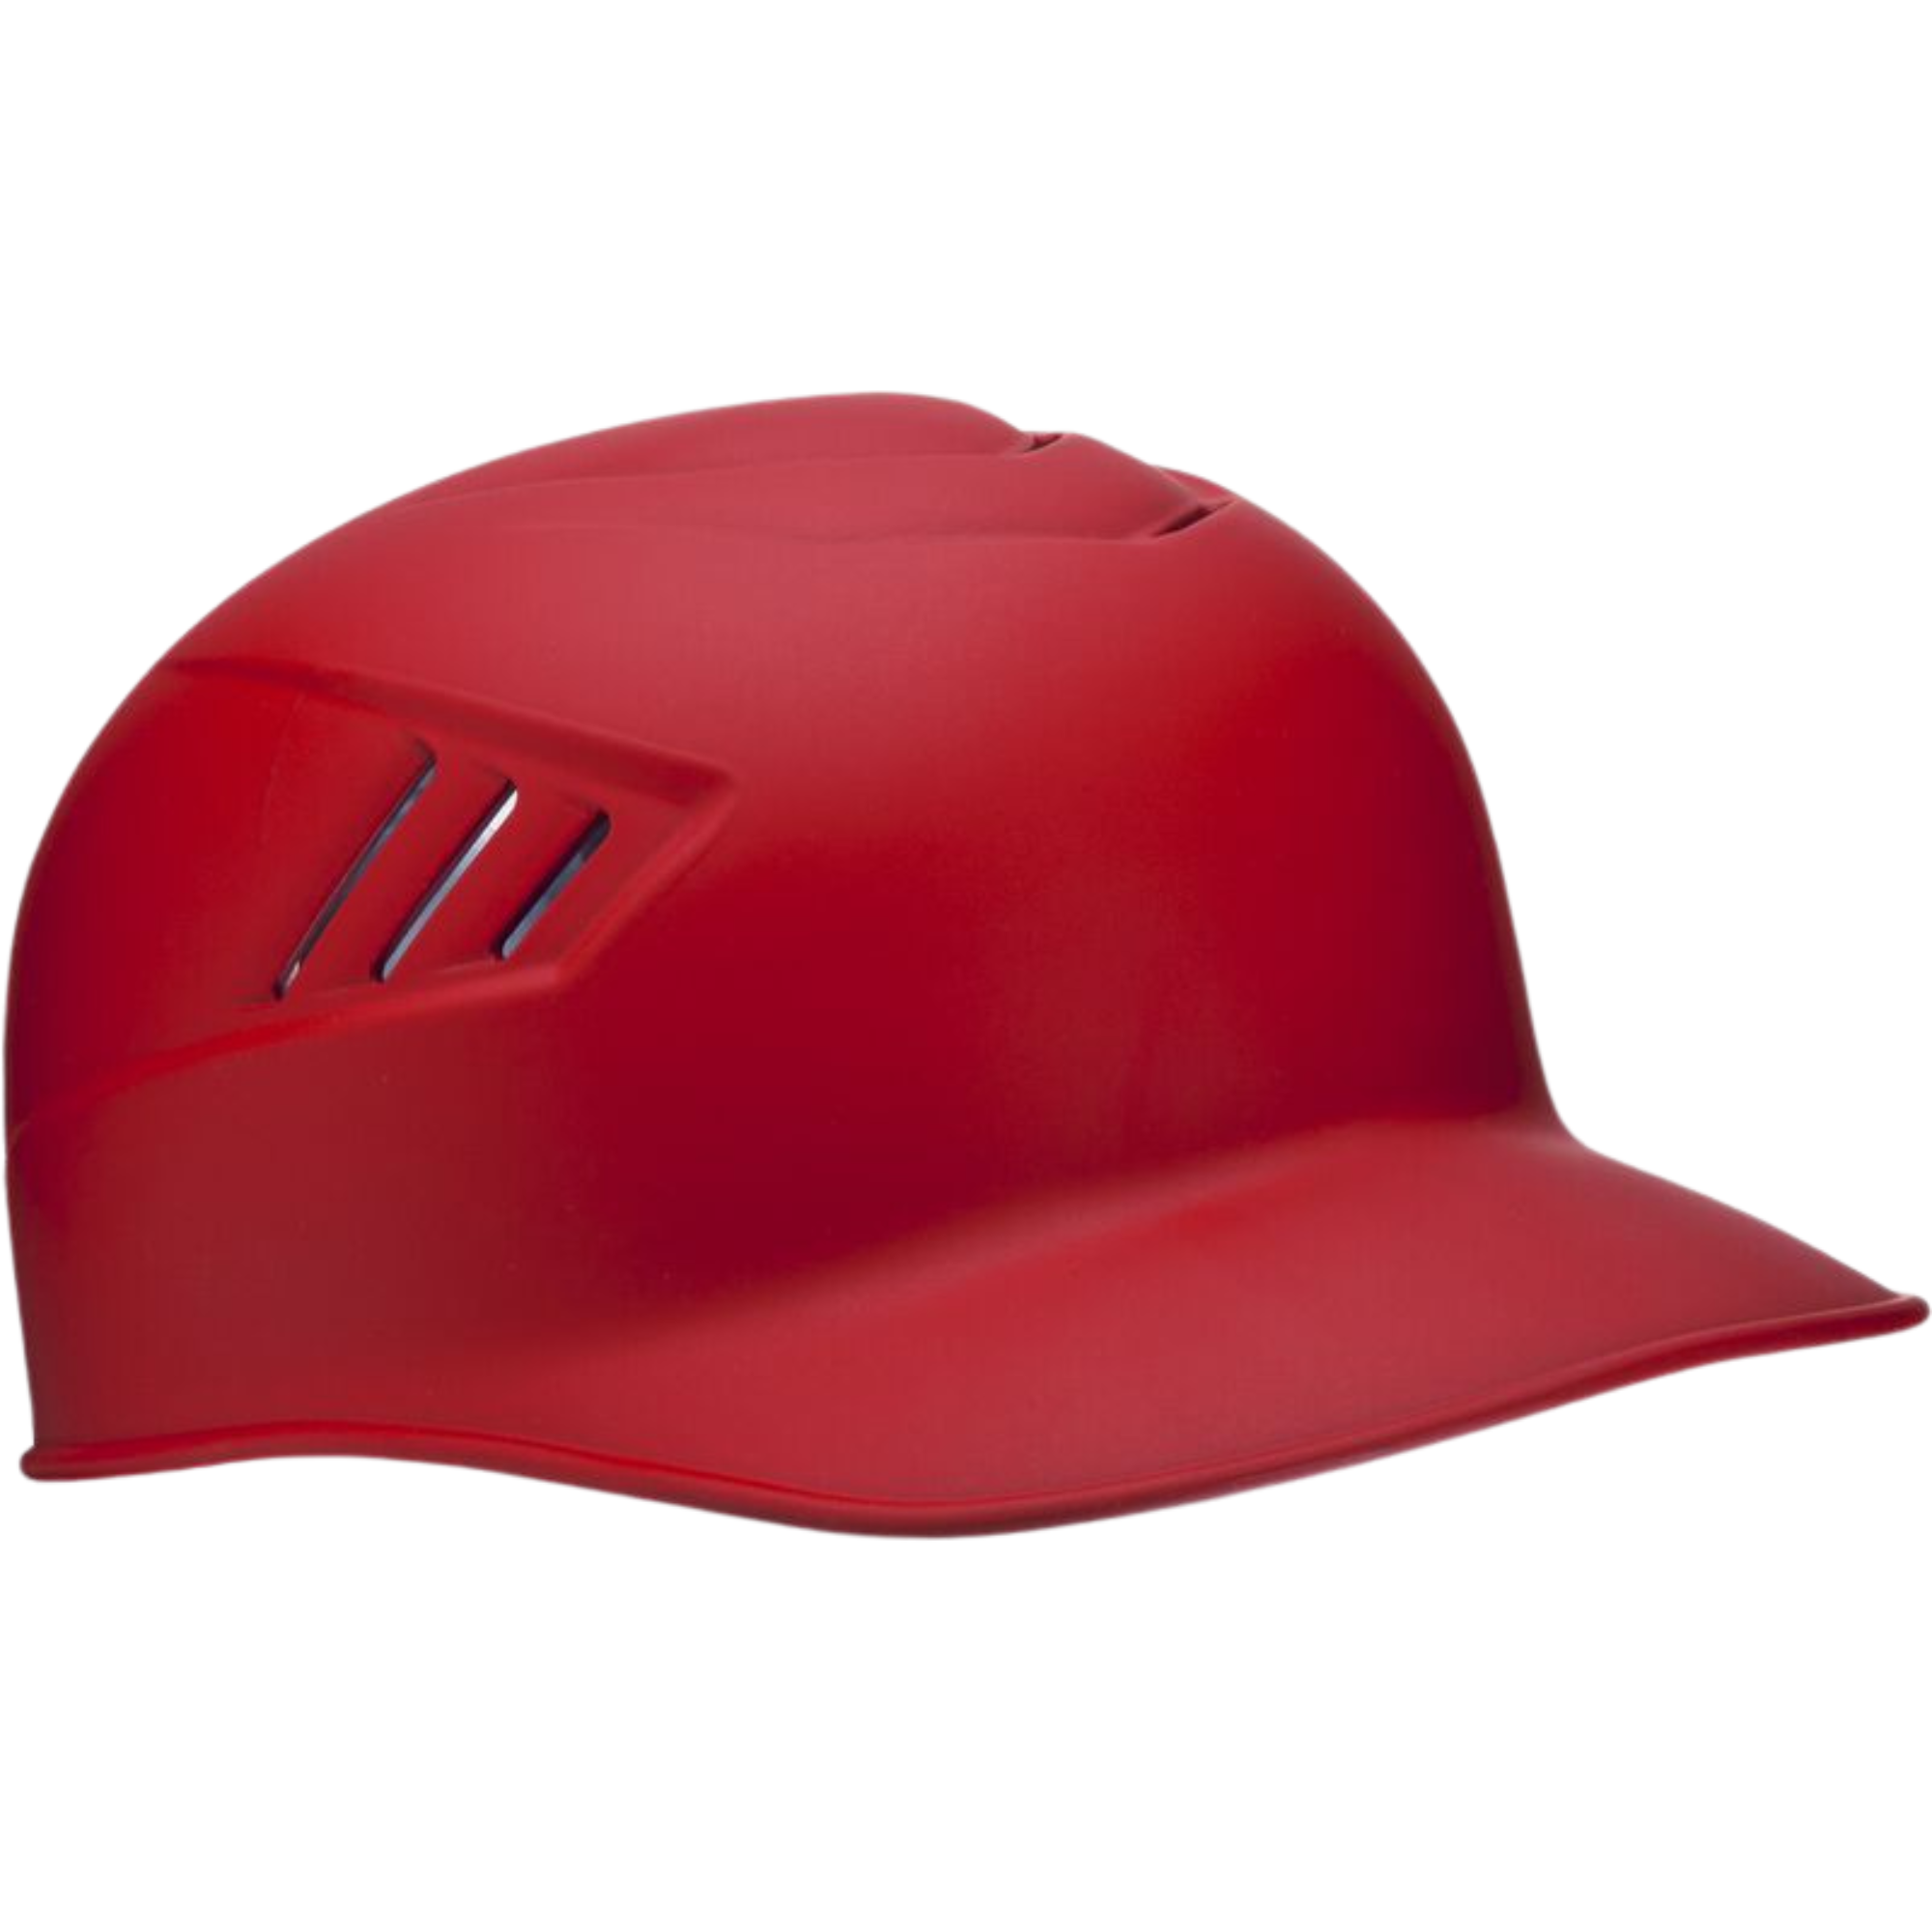 Rawlings Coolflo 1 Tone Catchers And  Base Coach Skull Cap Helmet - Matte Scarlet